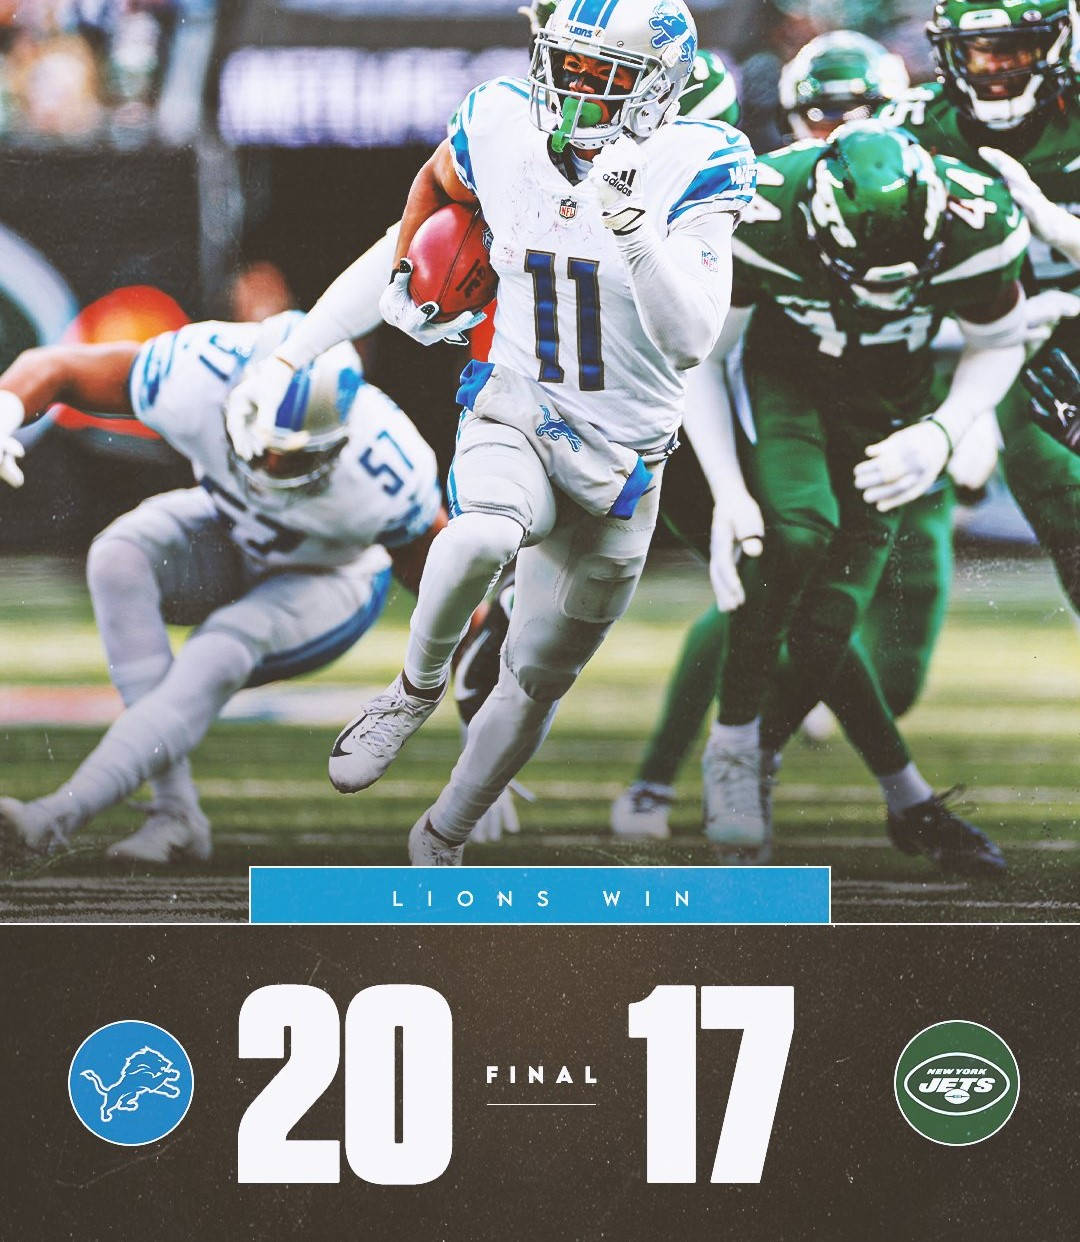 Lejonoch Jets Nfl-poäng. (note: This Is A Direct Translation And May Not Be The Most Commonly Used Way To Refer To Computer Or Mobile Wallpaper. A More Accurate Translation Would Depend On The Intended Context.) Wallpaper